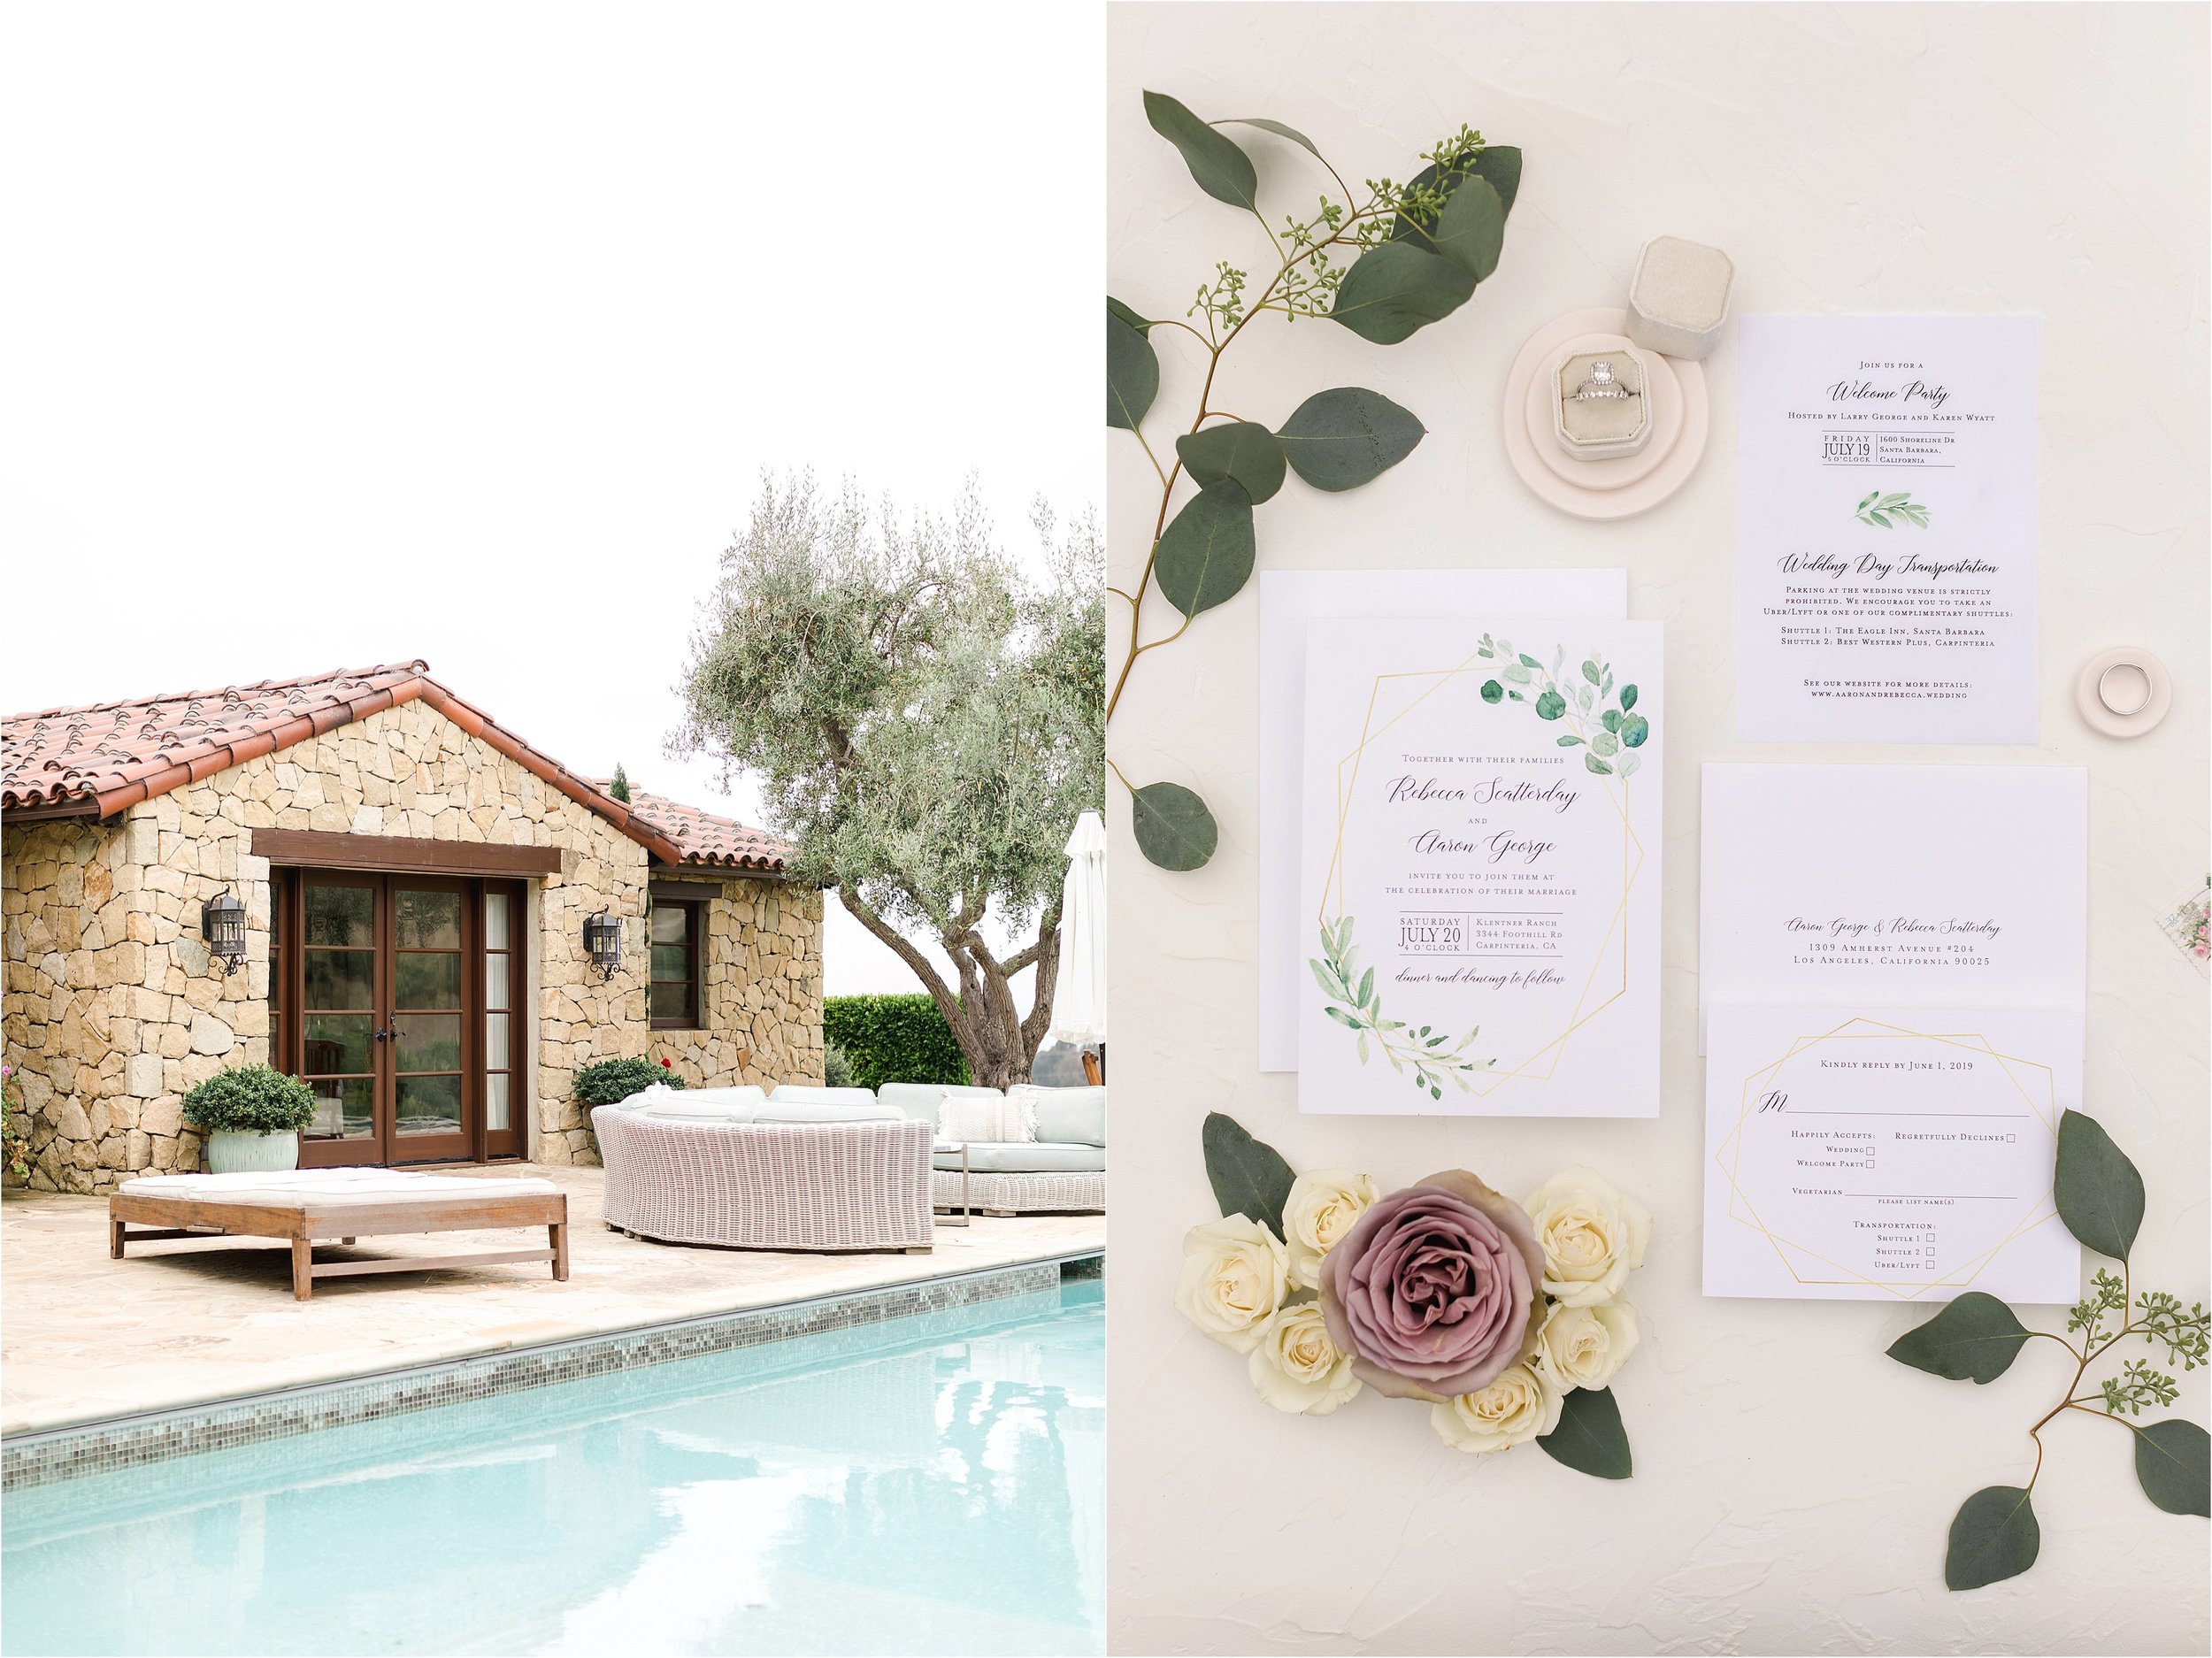 The image on the left shows the grounds of one of Southern California's most coveted private estate wedding venues, featuring a stone cottage overlooking a pool where the bride will be getting ready. The image on the right shows a flat-lay of the wedding invitation.